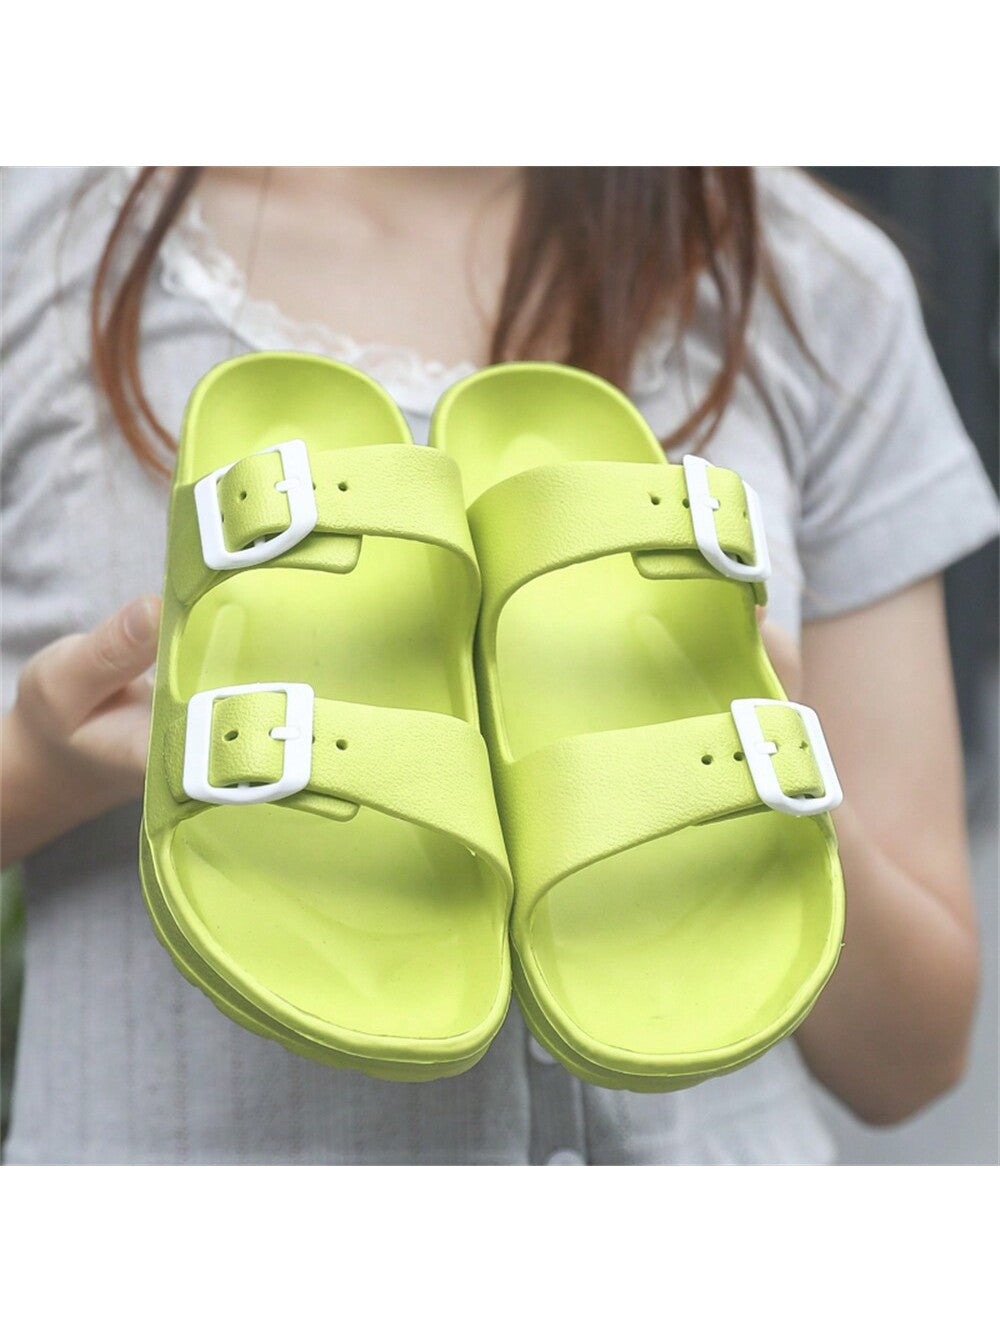 Spring Summer New Arrival Ultra-Breathable Women Sandals Plus Size Outdoor Beach Shoes Non-Slip Wear-Resistant Soft & Comfortable-Green-1